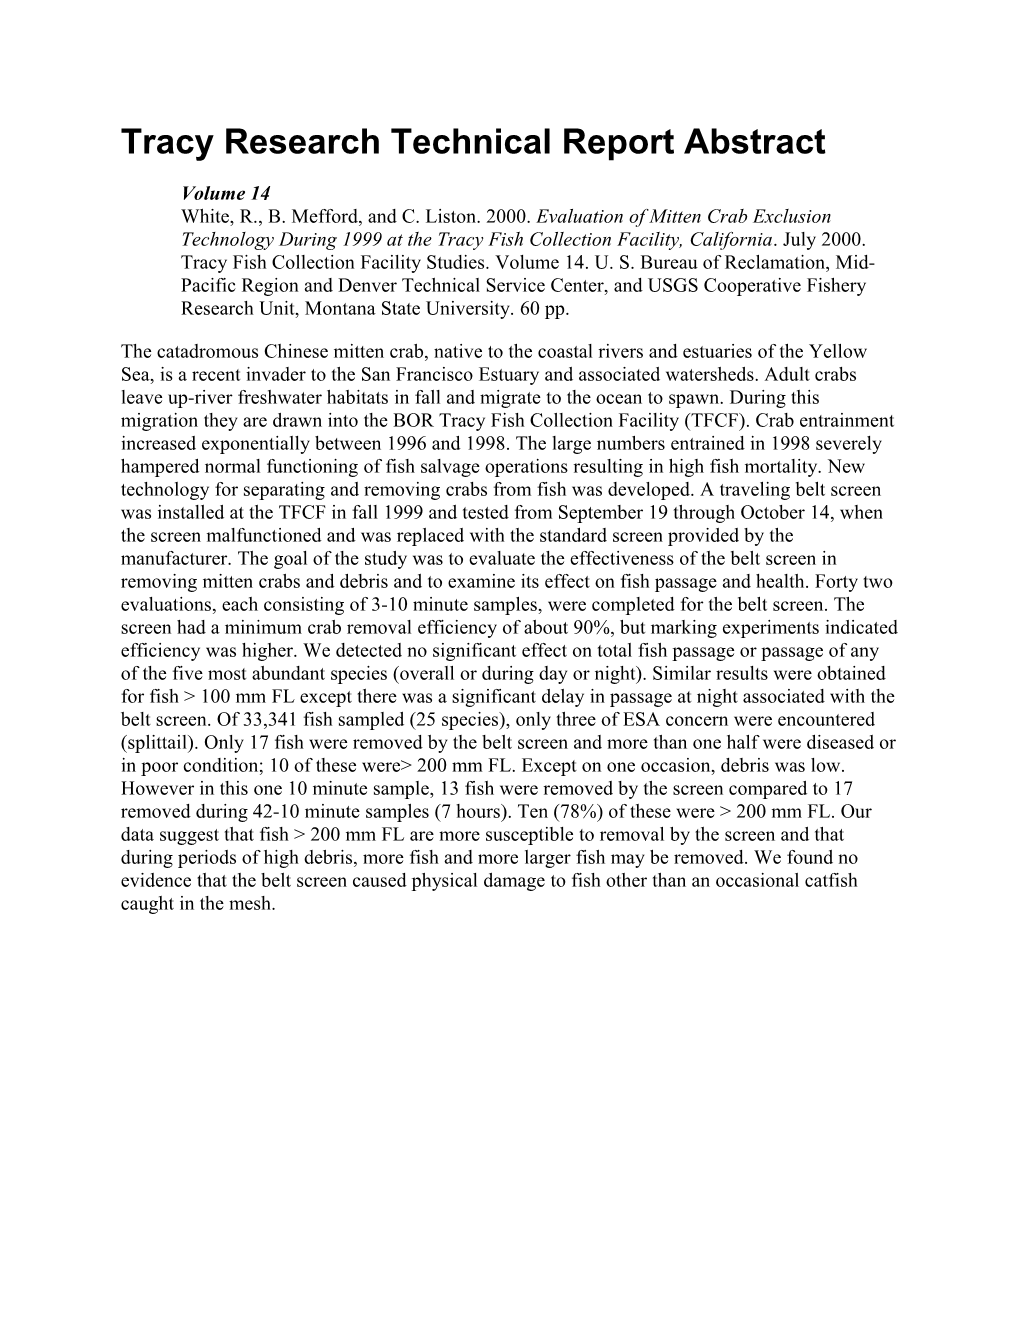 Tracy Research Tech Report Abstract Vol. 14